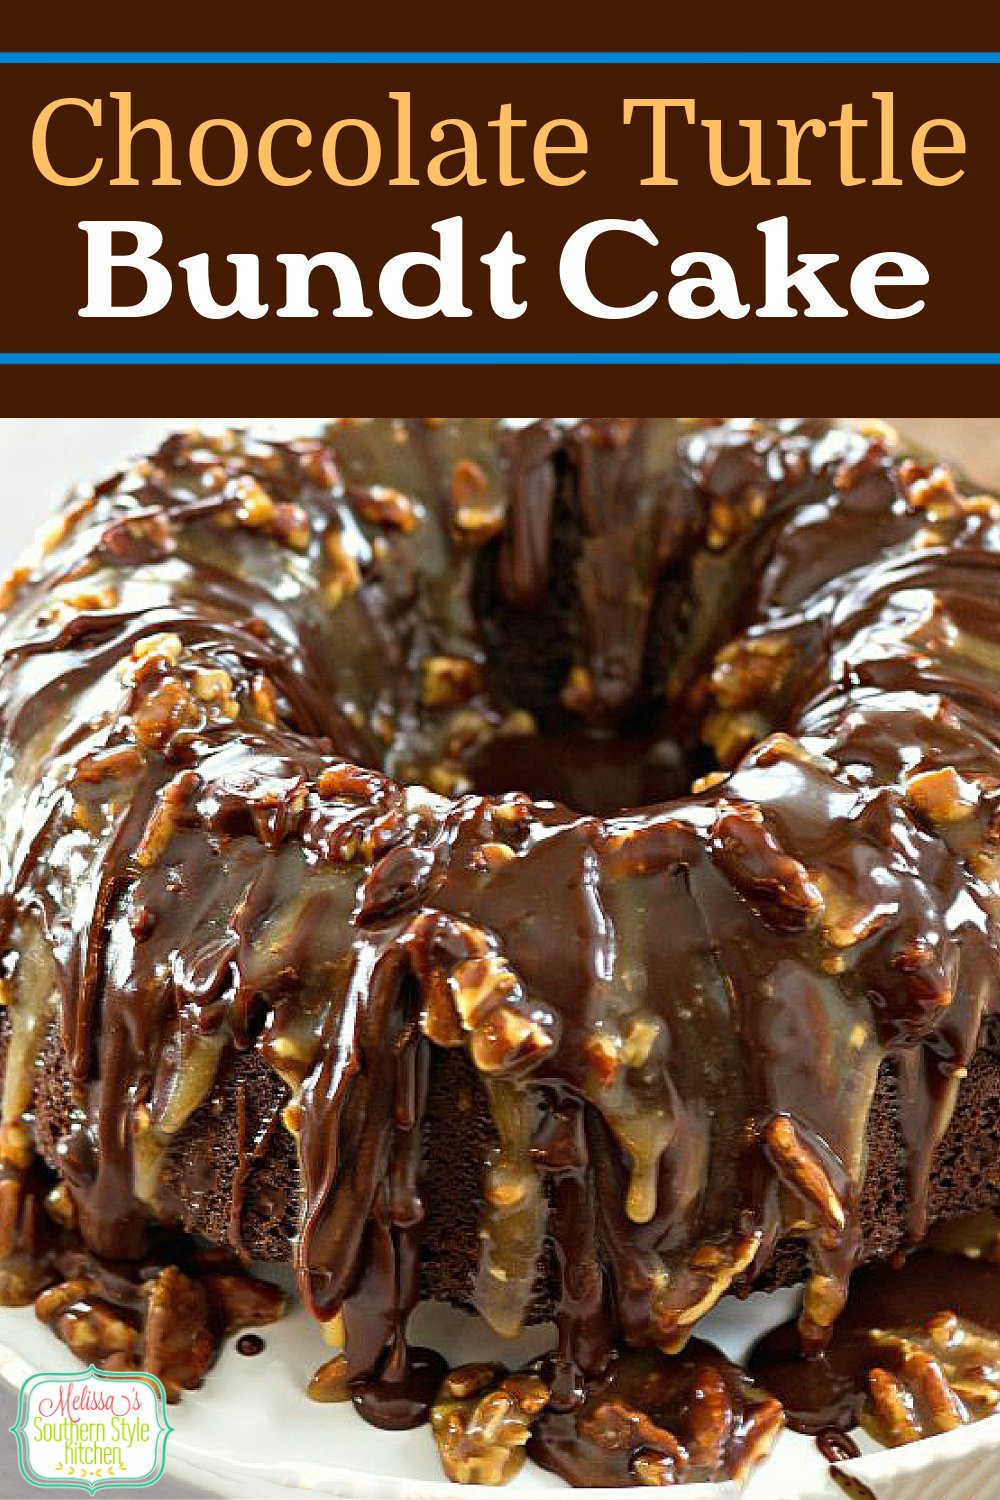 This stunning Chocolate Turtle Bundt Cake is is drizzled with a buttery homemade pecan-caramel sauce and fudgy chocolate ganache #turtlecake #turtlebundtcake #chocolatecakerecipes #chocolatecake via @melissasssk